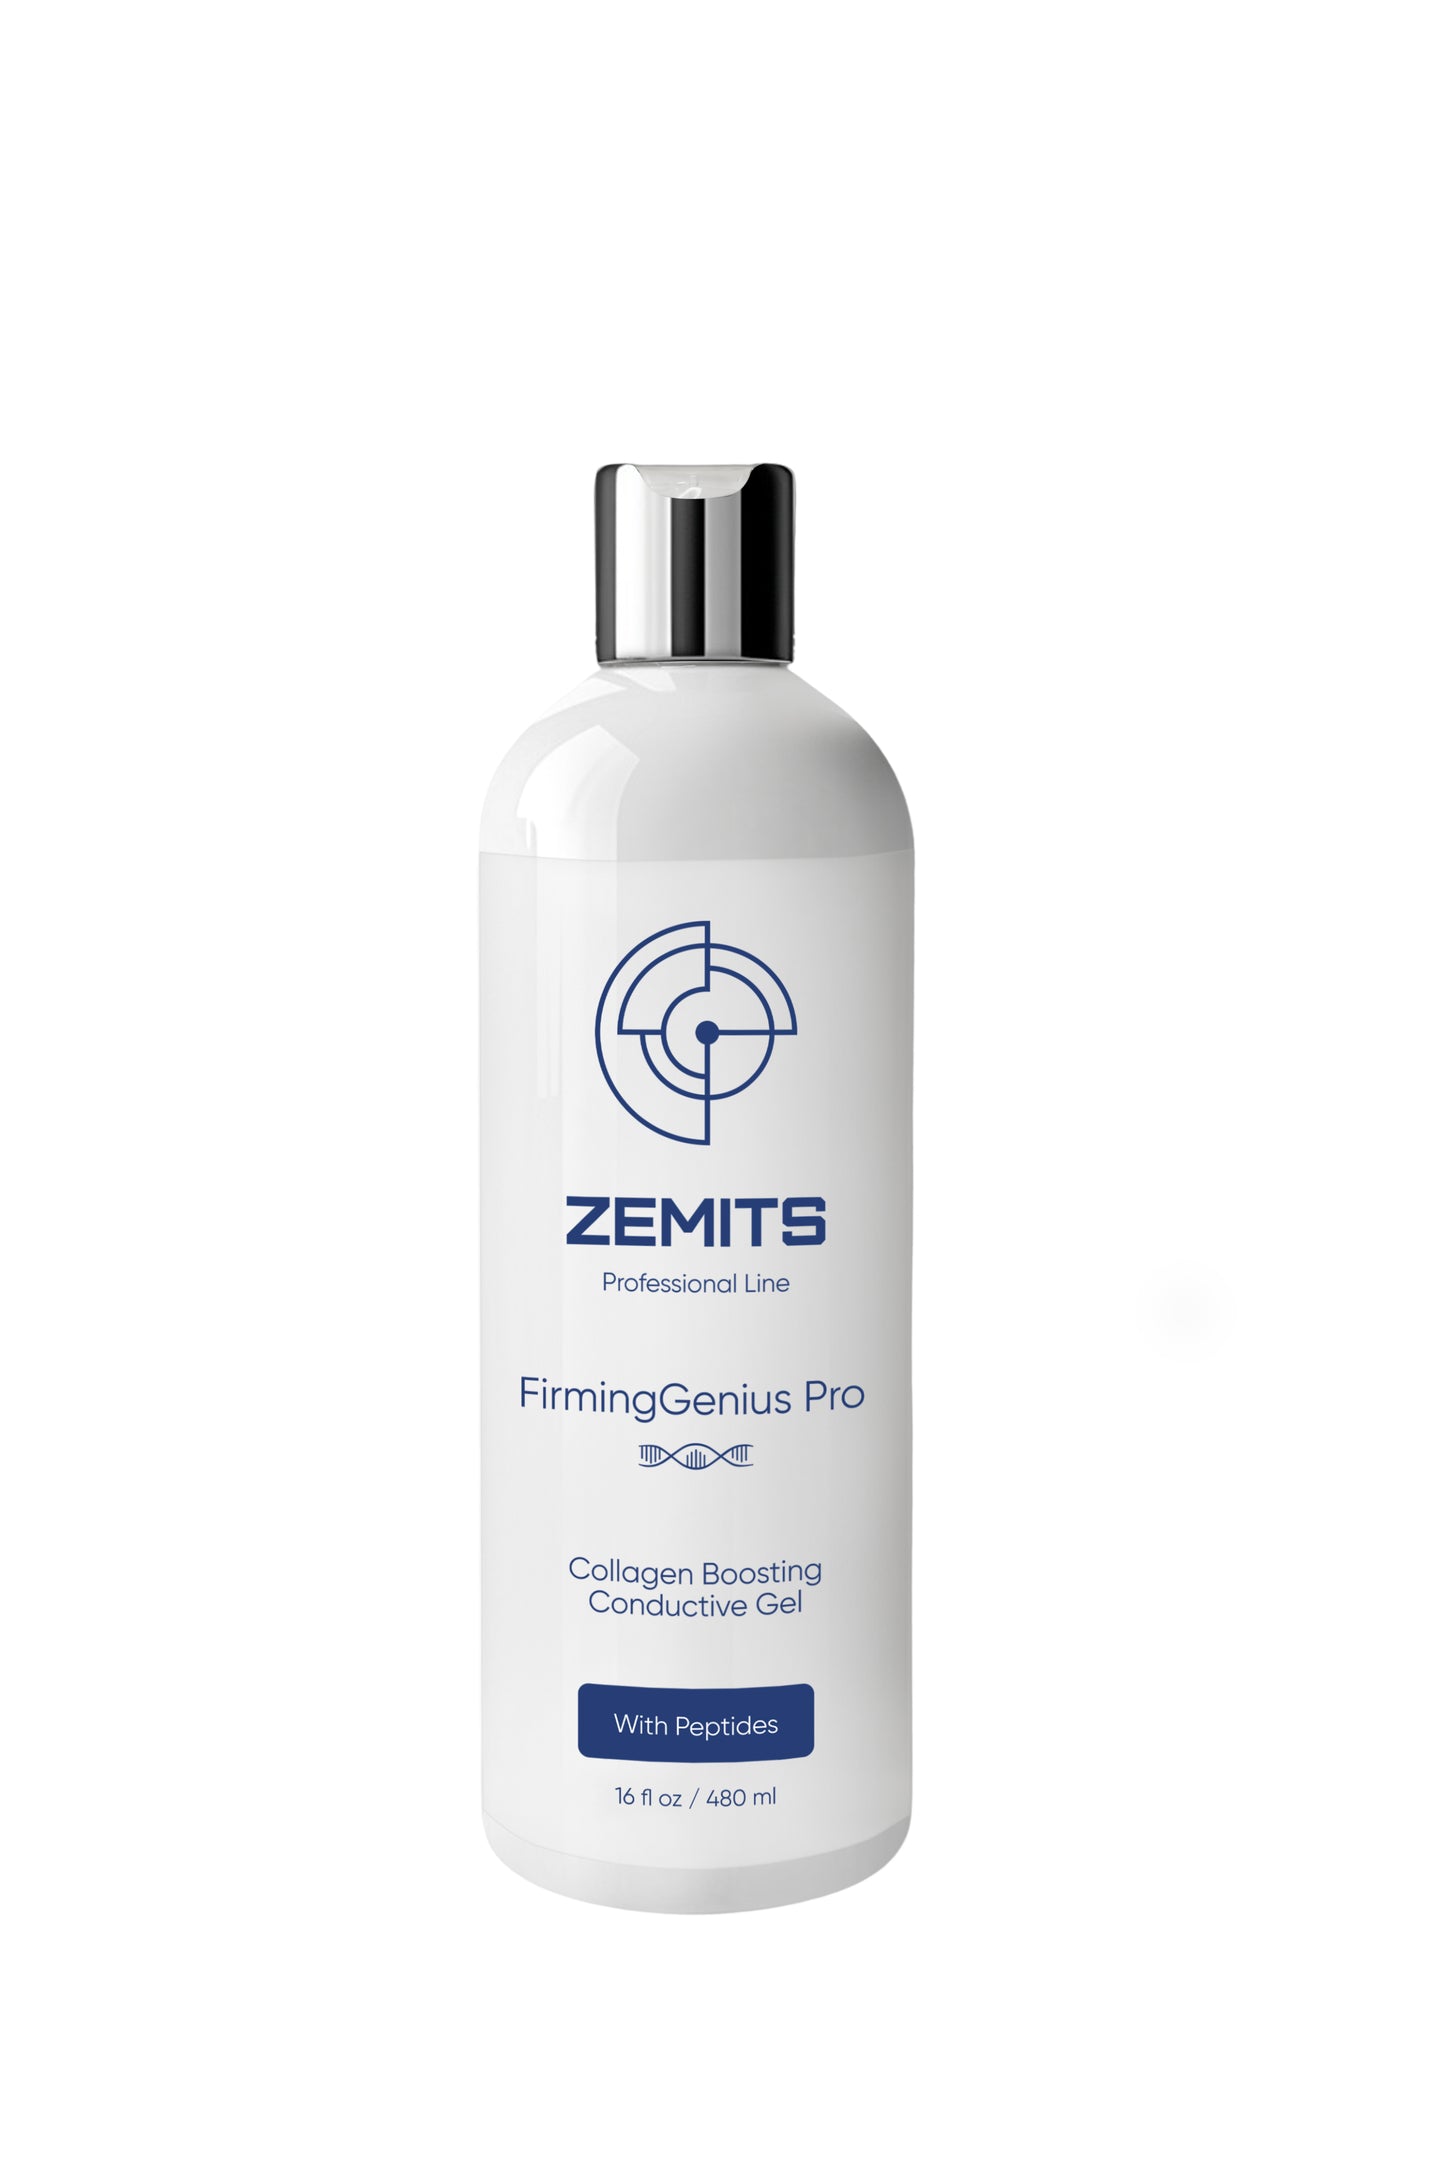 Zemits FirmingGenius Pro  Collagen Boosting Conductive Gel with Peptides, 16  oz